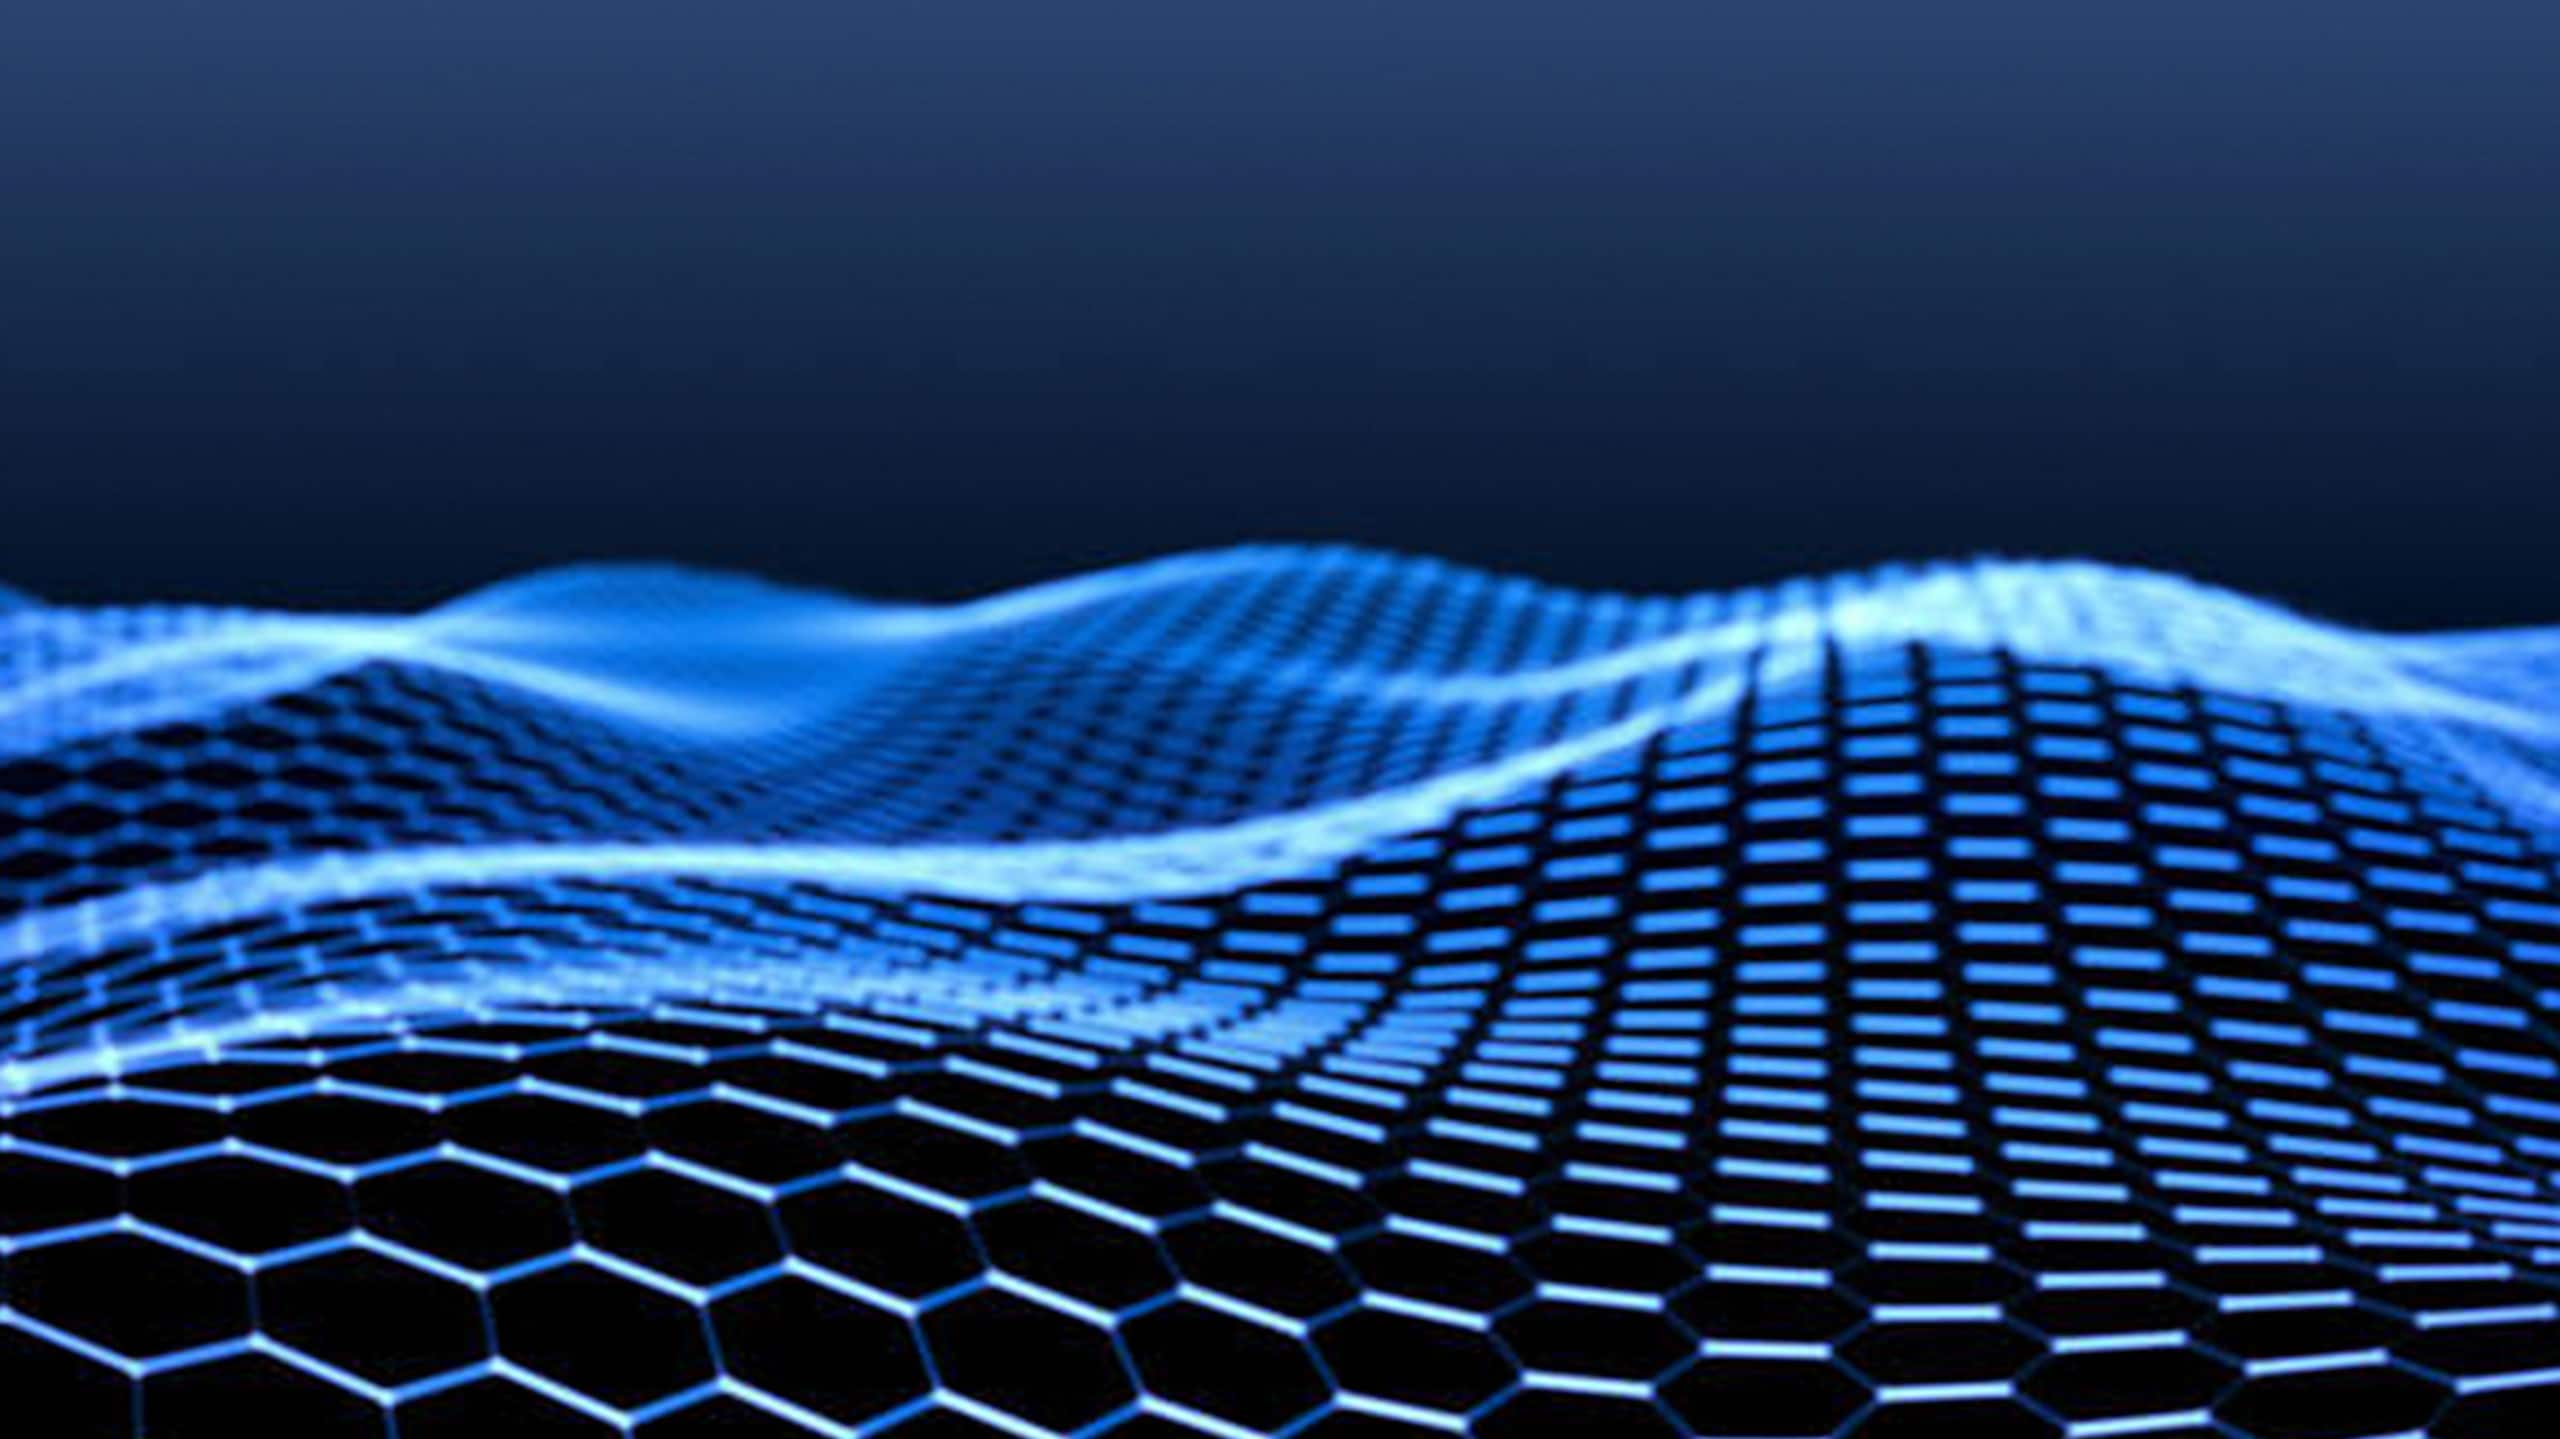 Digital illustration of a dynamic blue hexagonal mesh landscape on a dark background, representing a 3d topographical map with waves.